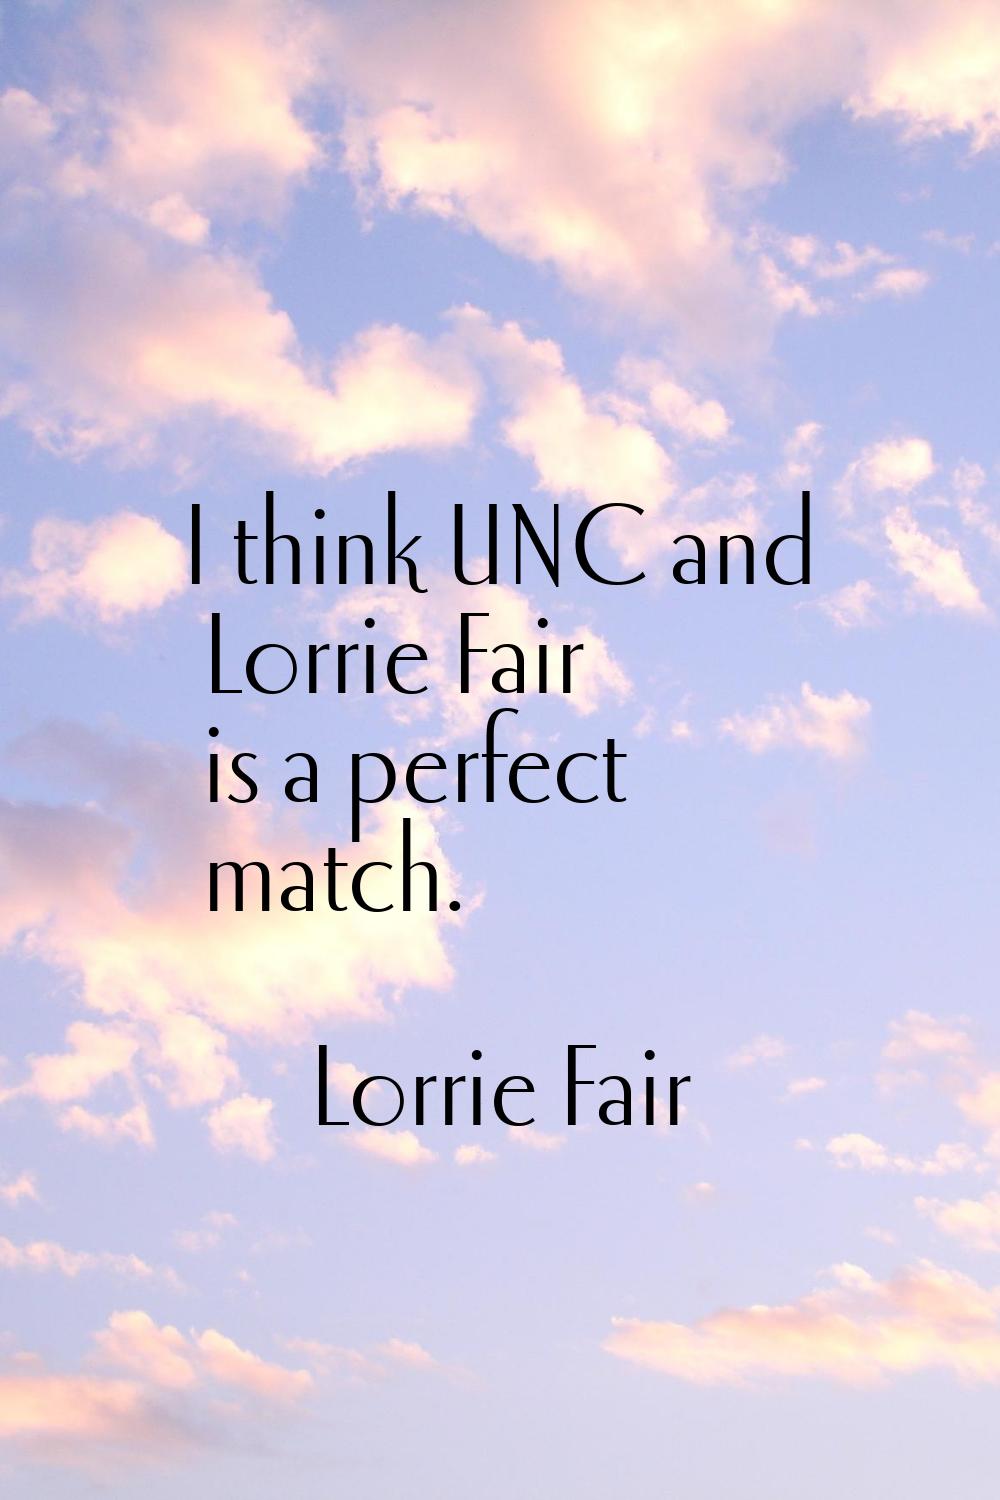 I think UNC and Lorrie Fair is a perfect match.